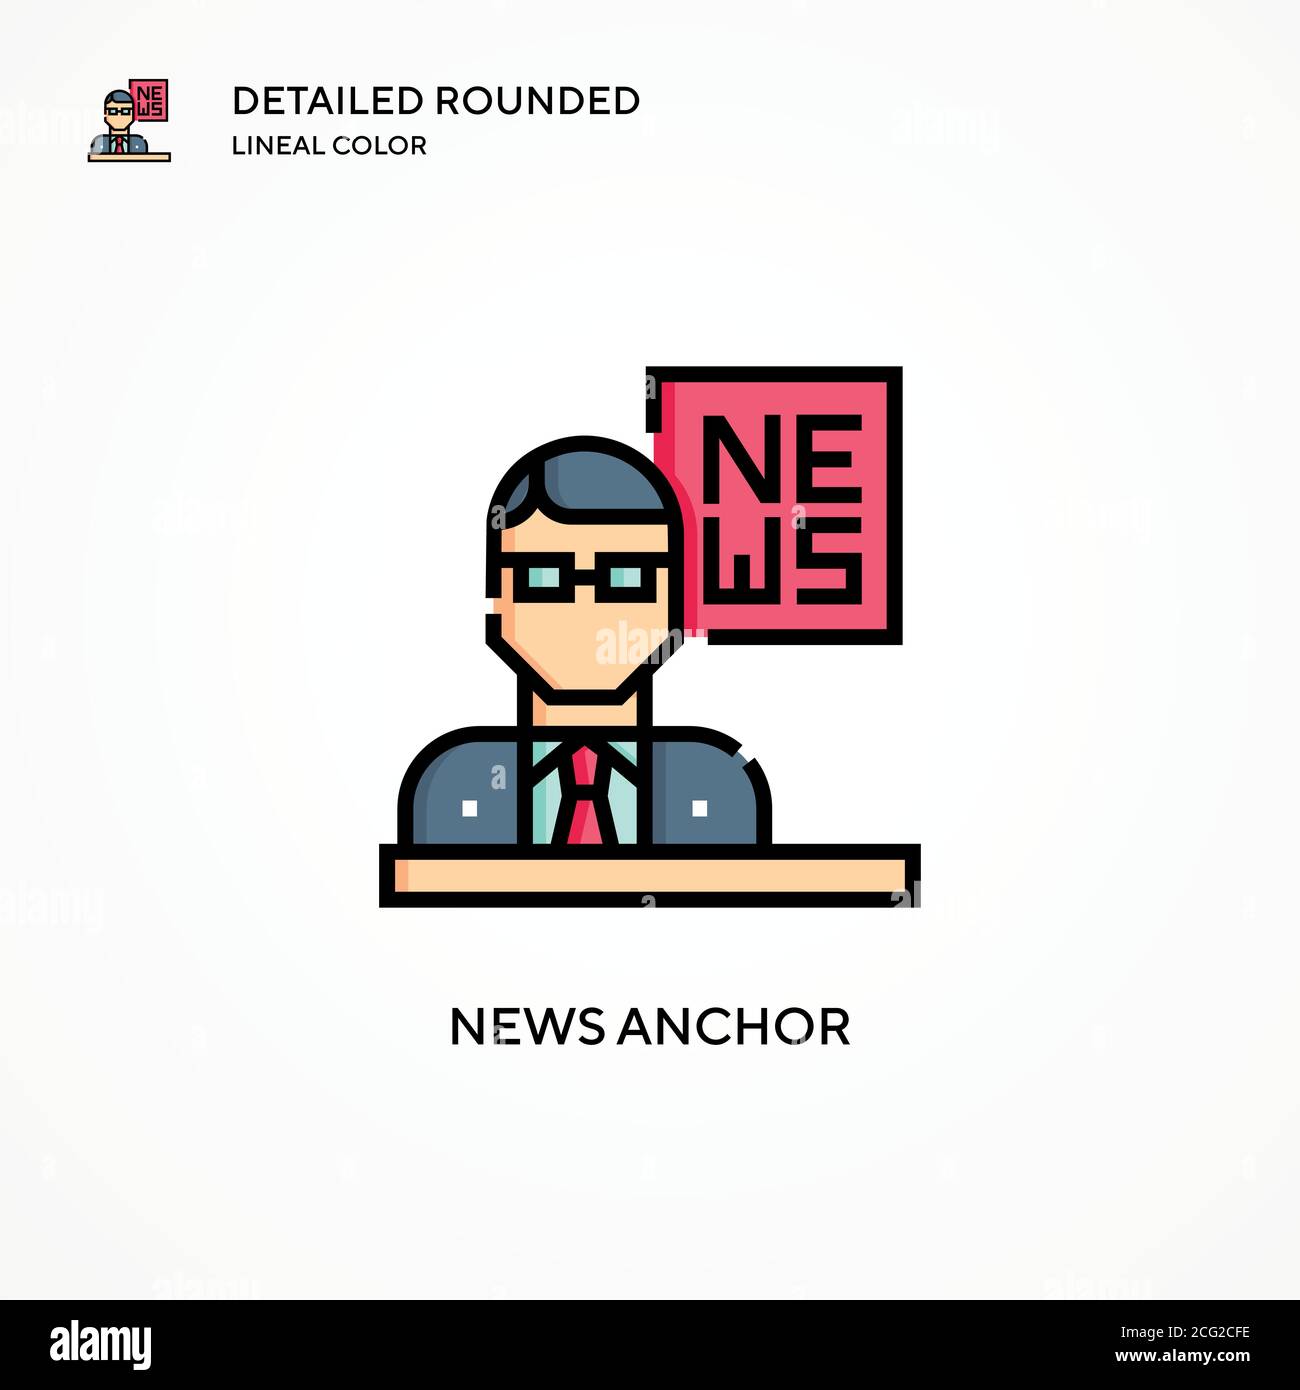 News anchor vector icon. Modern vector illustration concepts. Easy to edit and customize. Stock Vector